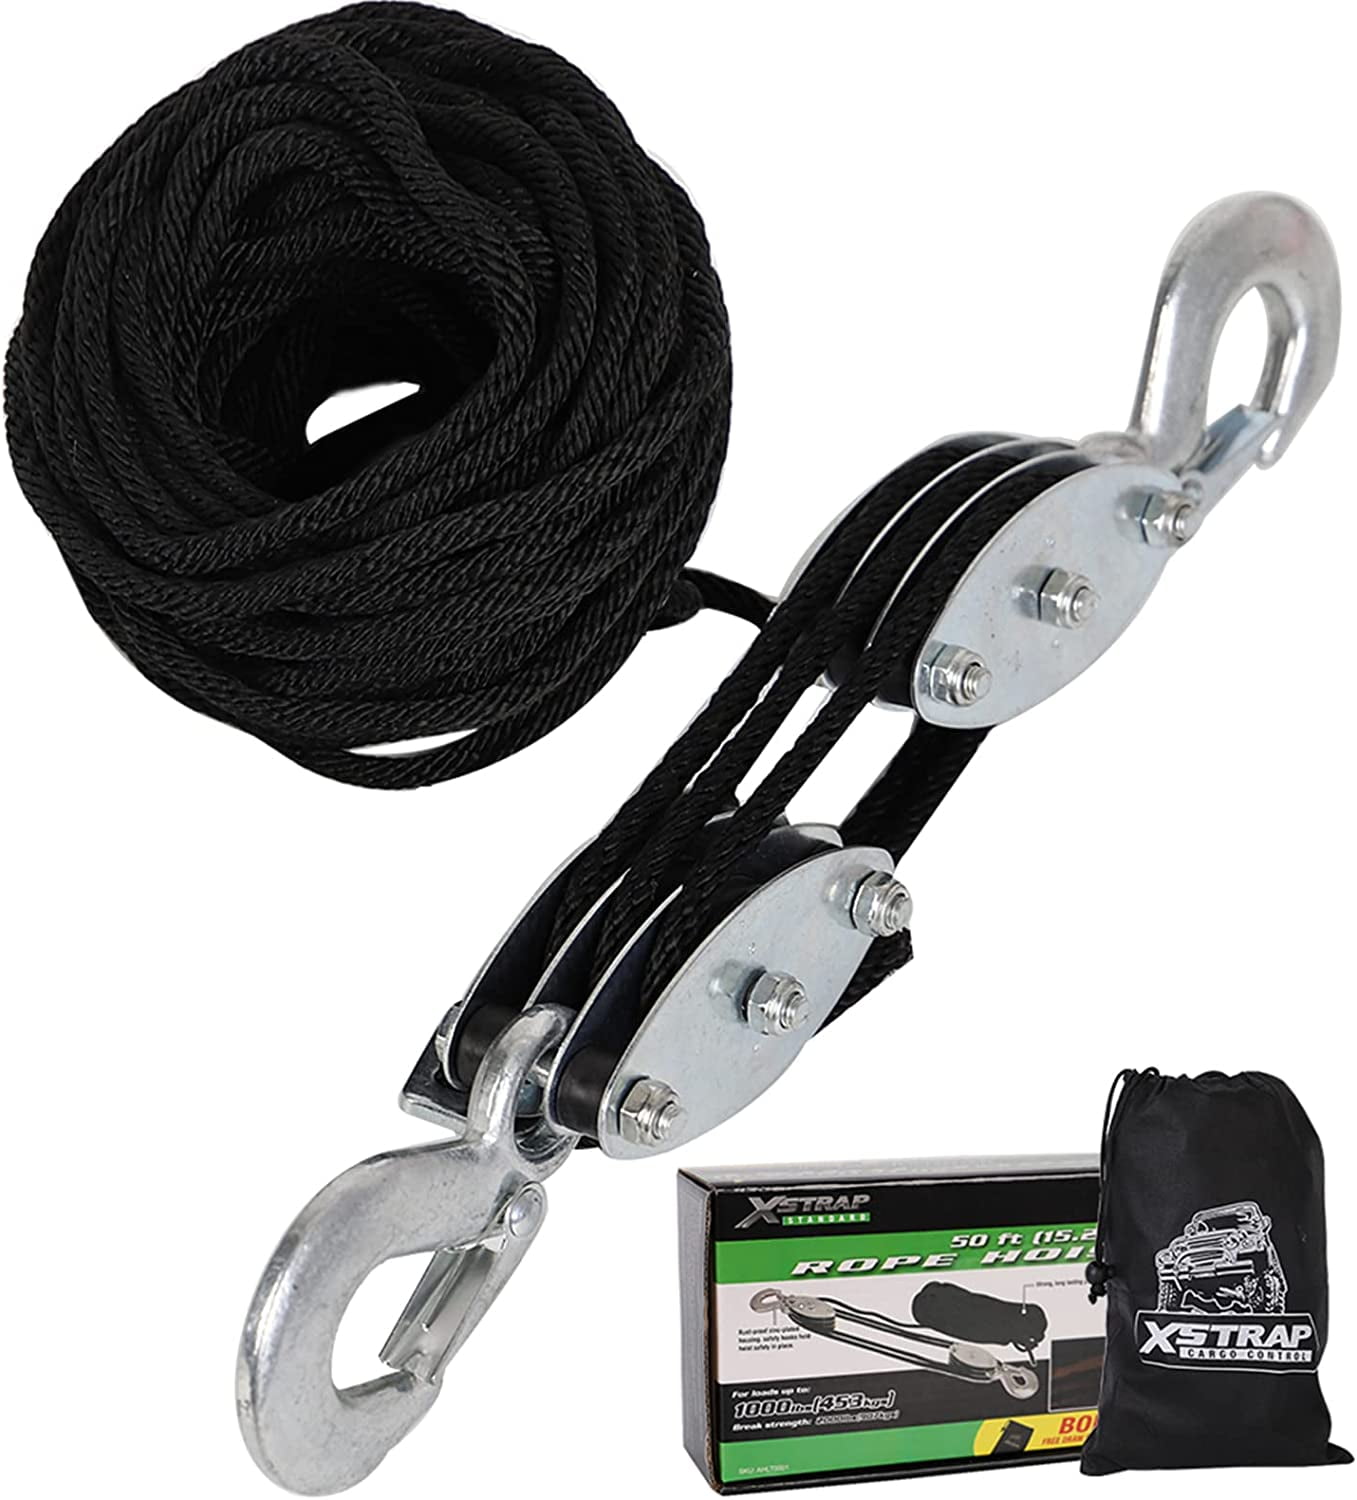 2 Ton ROPE HOIST with 2 HOOKS and Safety CLIPS Dual 4 wheel Pulley Blocks  65 ft.